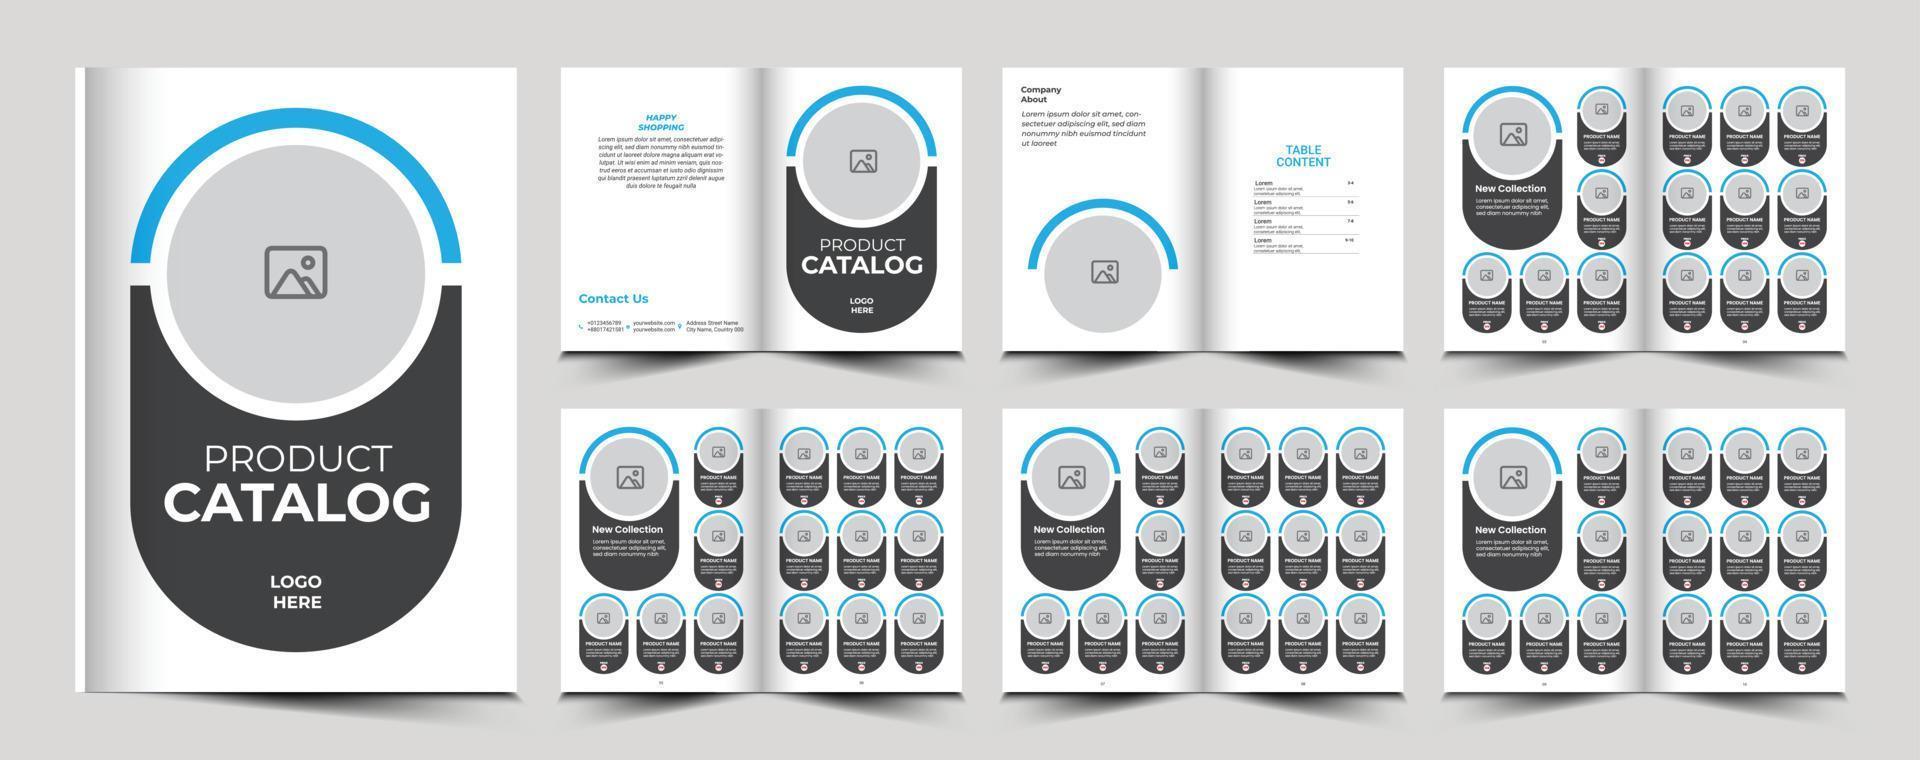 Product catalog or catalogue template design vector